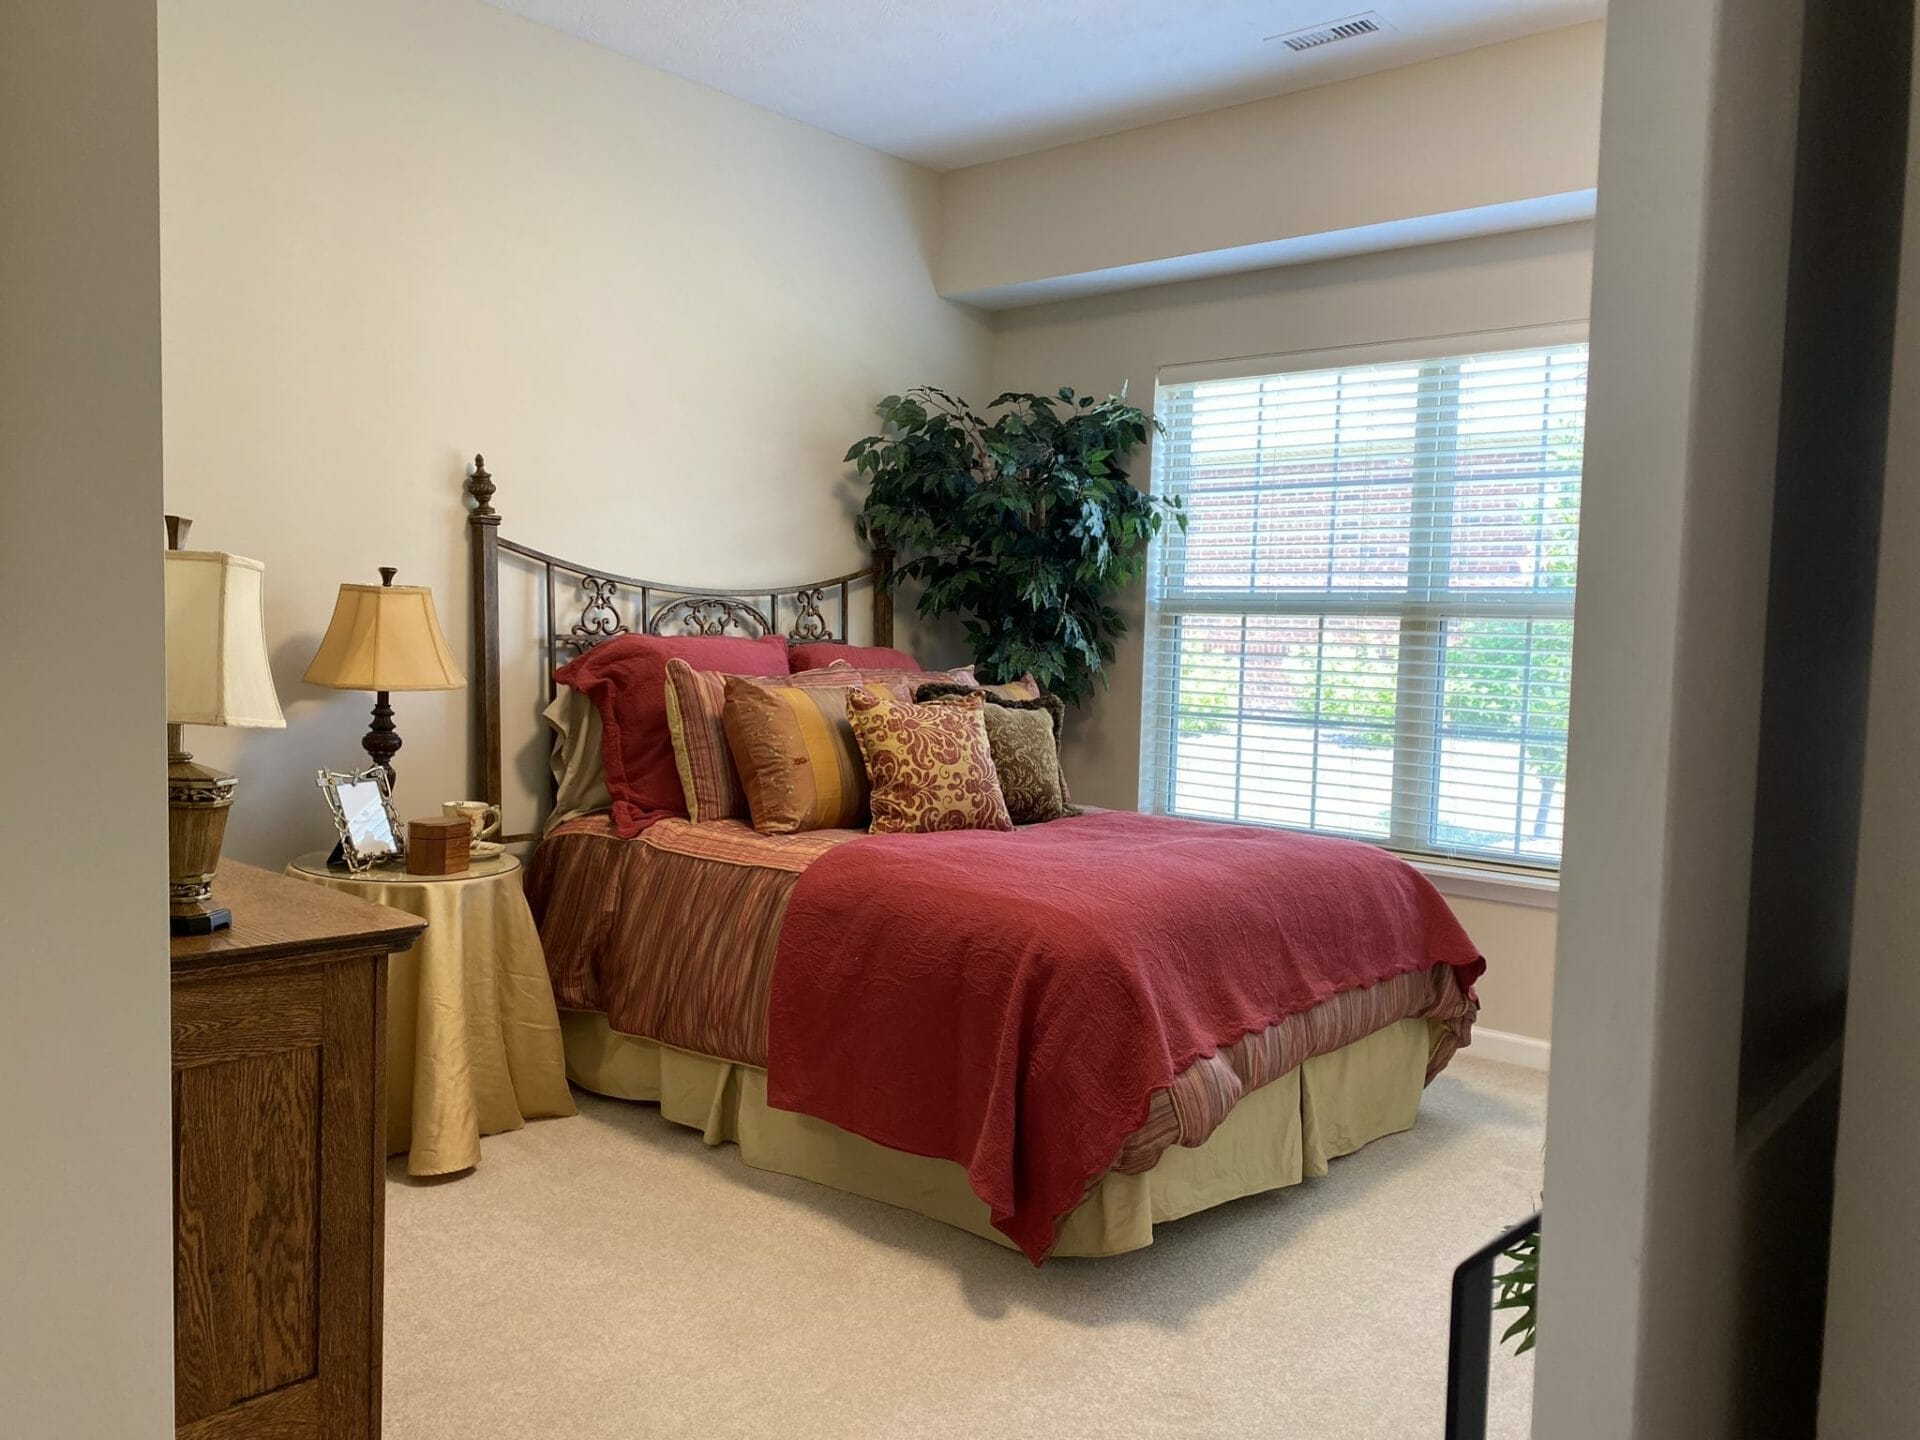 <span  class="uc_style_uc_tiles_grid_image_elementor_uc_items_attribute_title" style="color:#000000;">Aster Place Garden Home Bedroom </span>